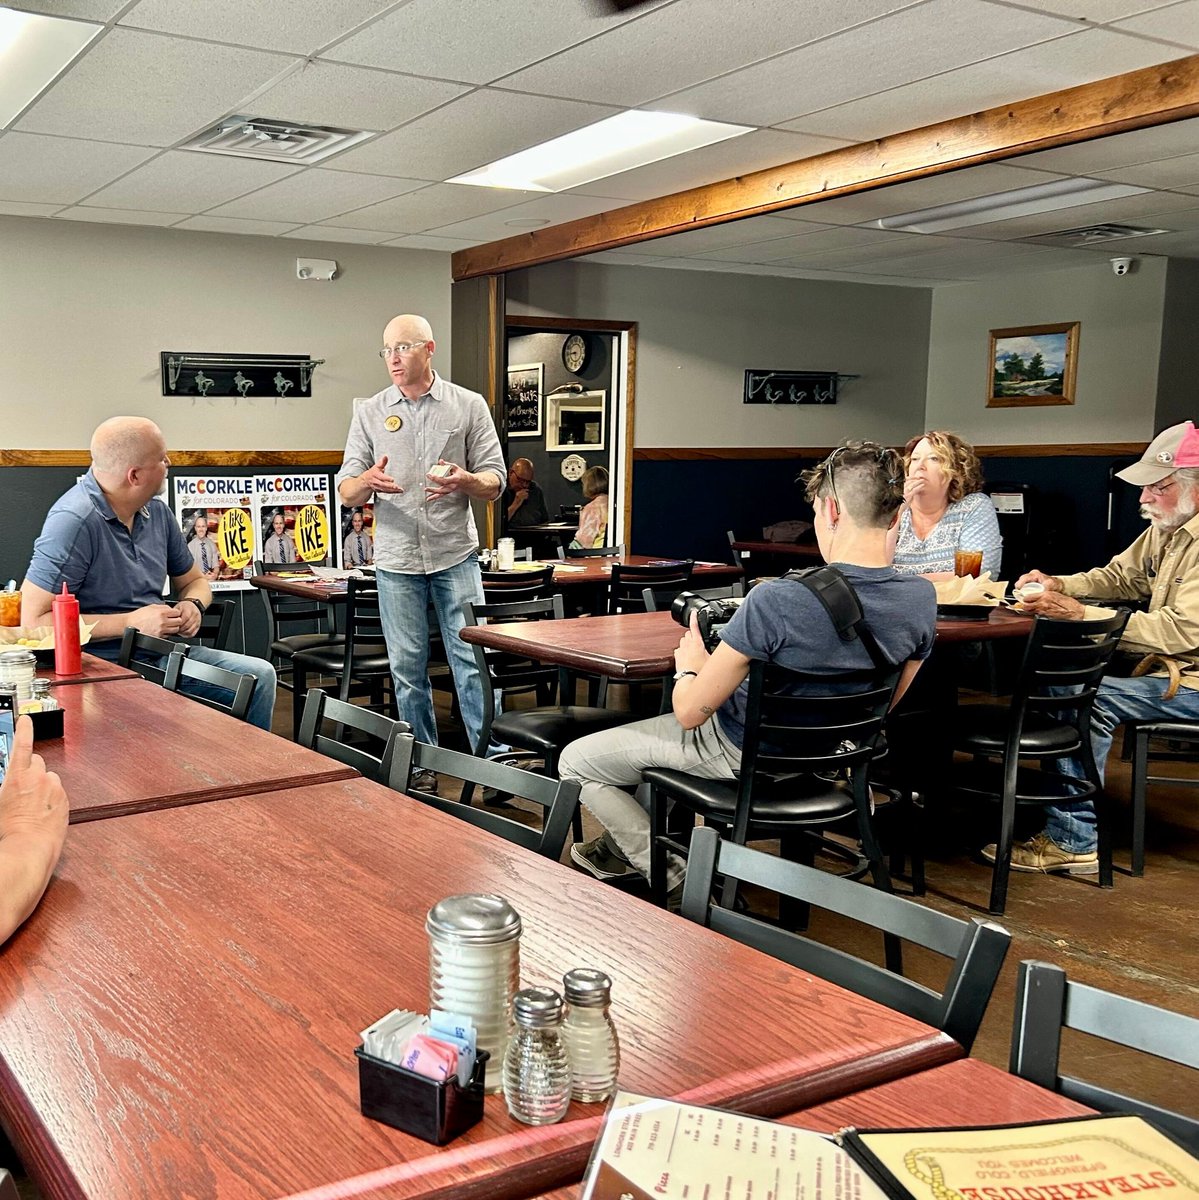 It was inspiring to see Democrats, Republicans, & unaffiliated voters come together for lively discussions at our Coffee with Ike in Lamar. Your engagement reflects the strength of our democracy. Let's keep bridging divides & working for a better future, united as Coloradans!